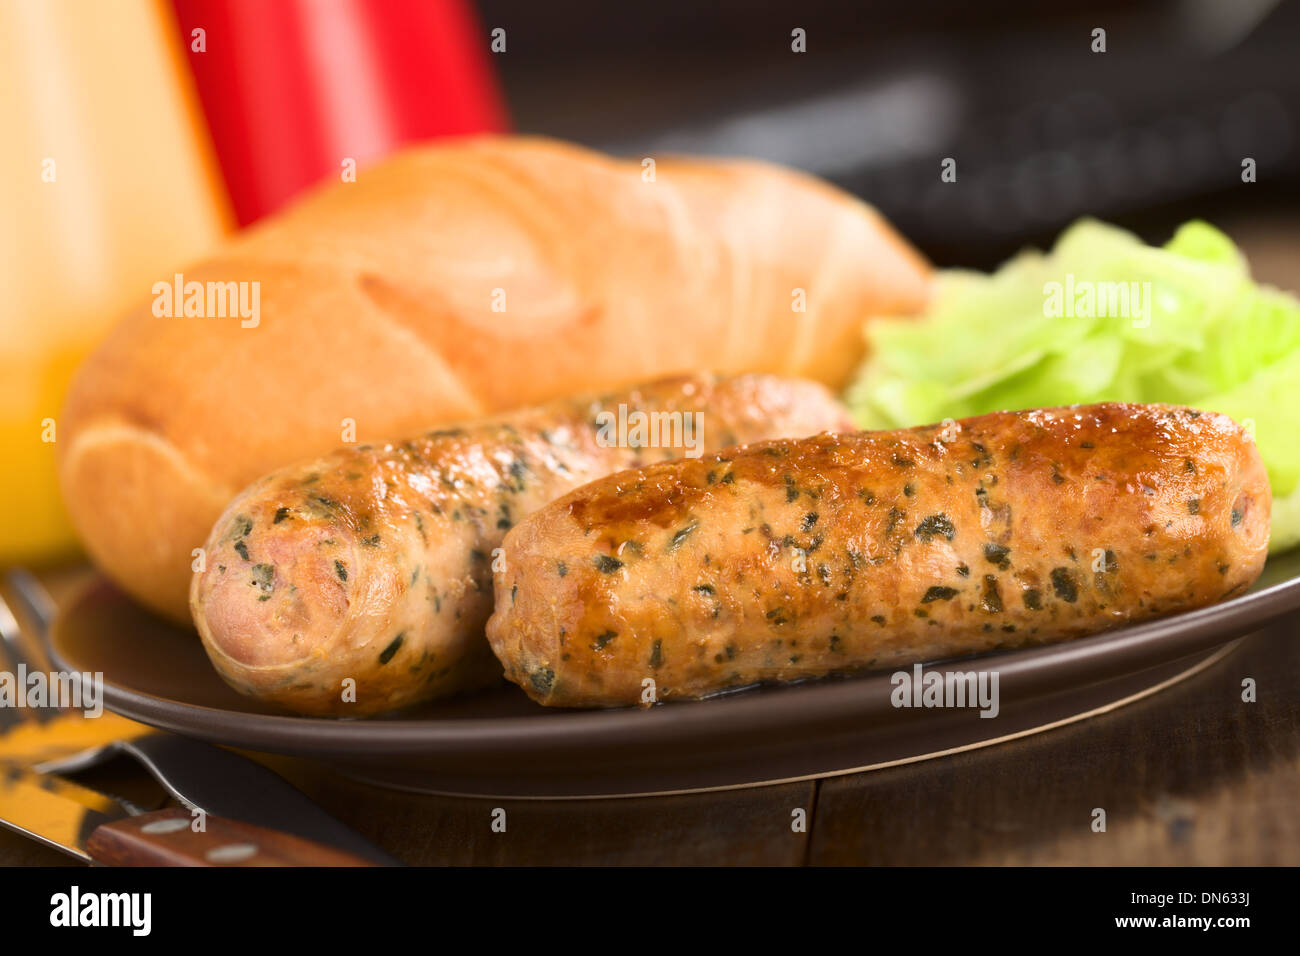 Fried bratwurst with bun, traditional German fast food served on plate with green salad Stock Photo